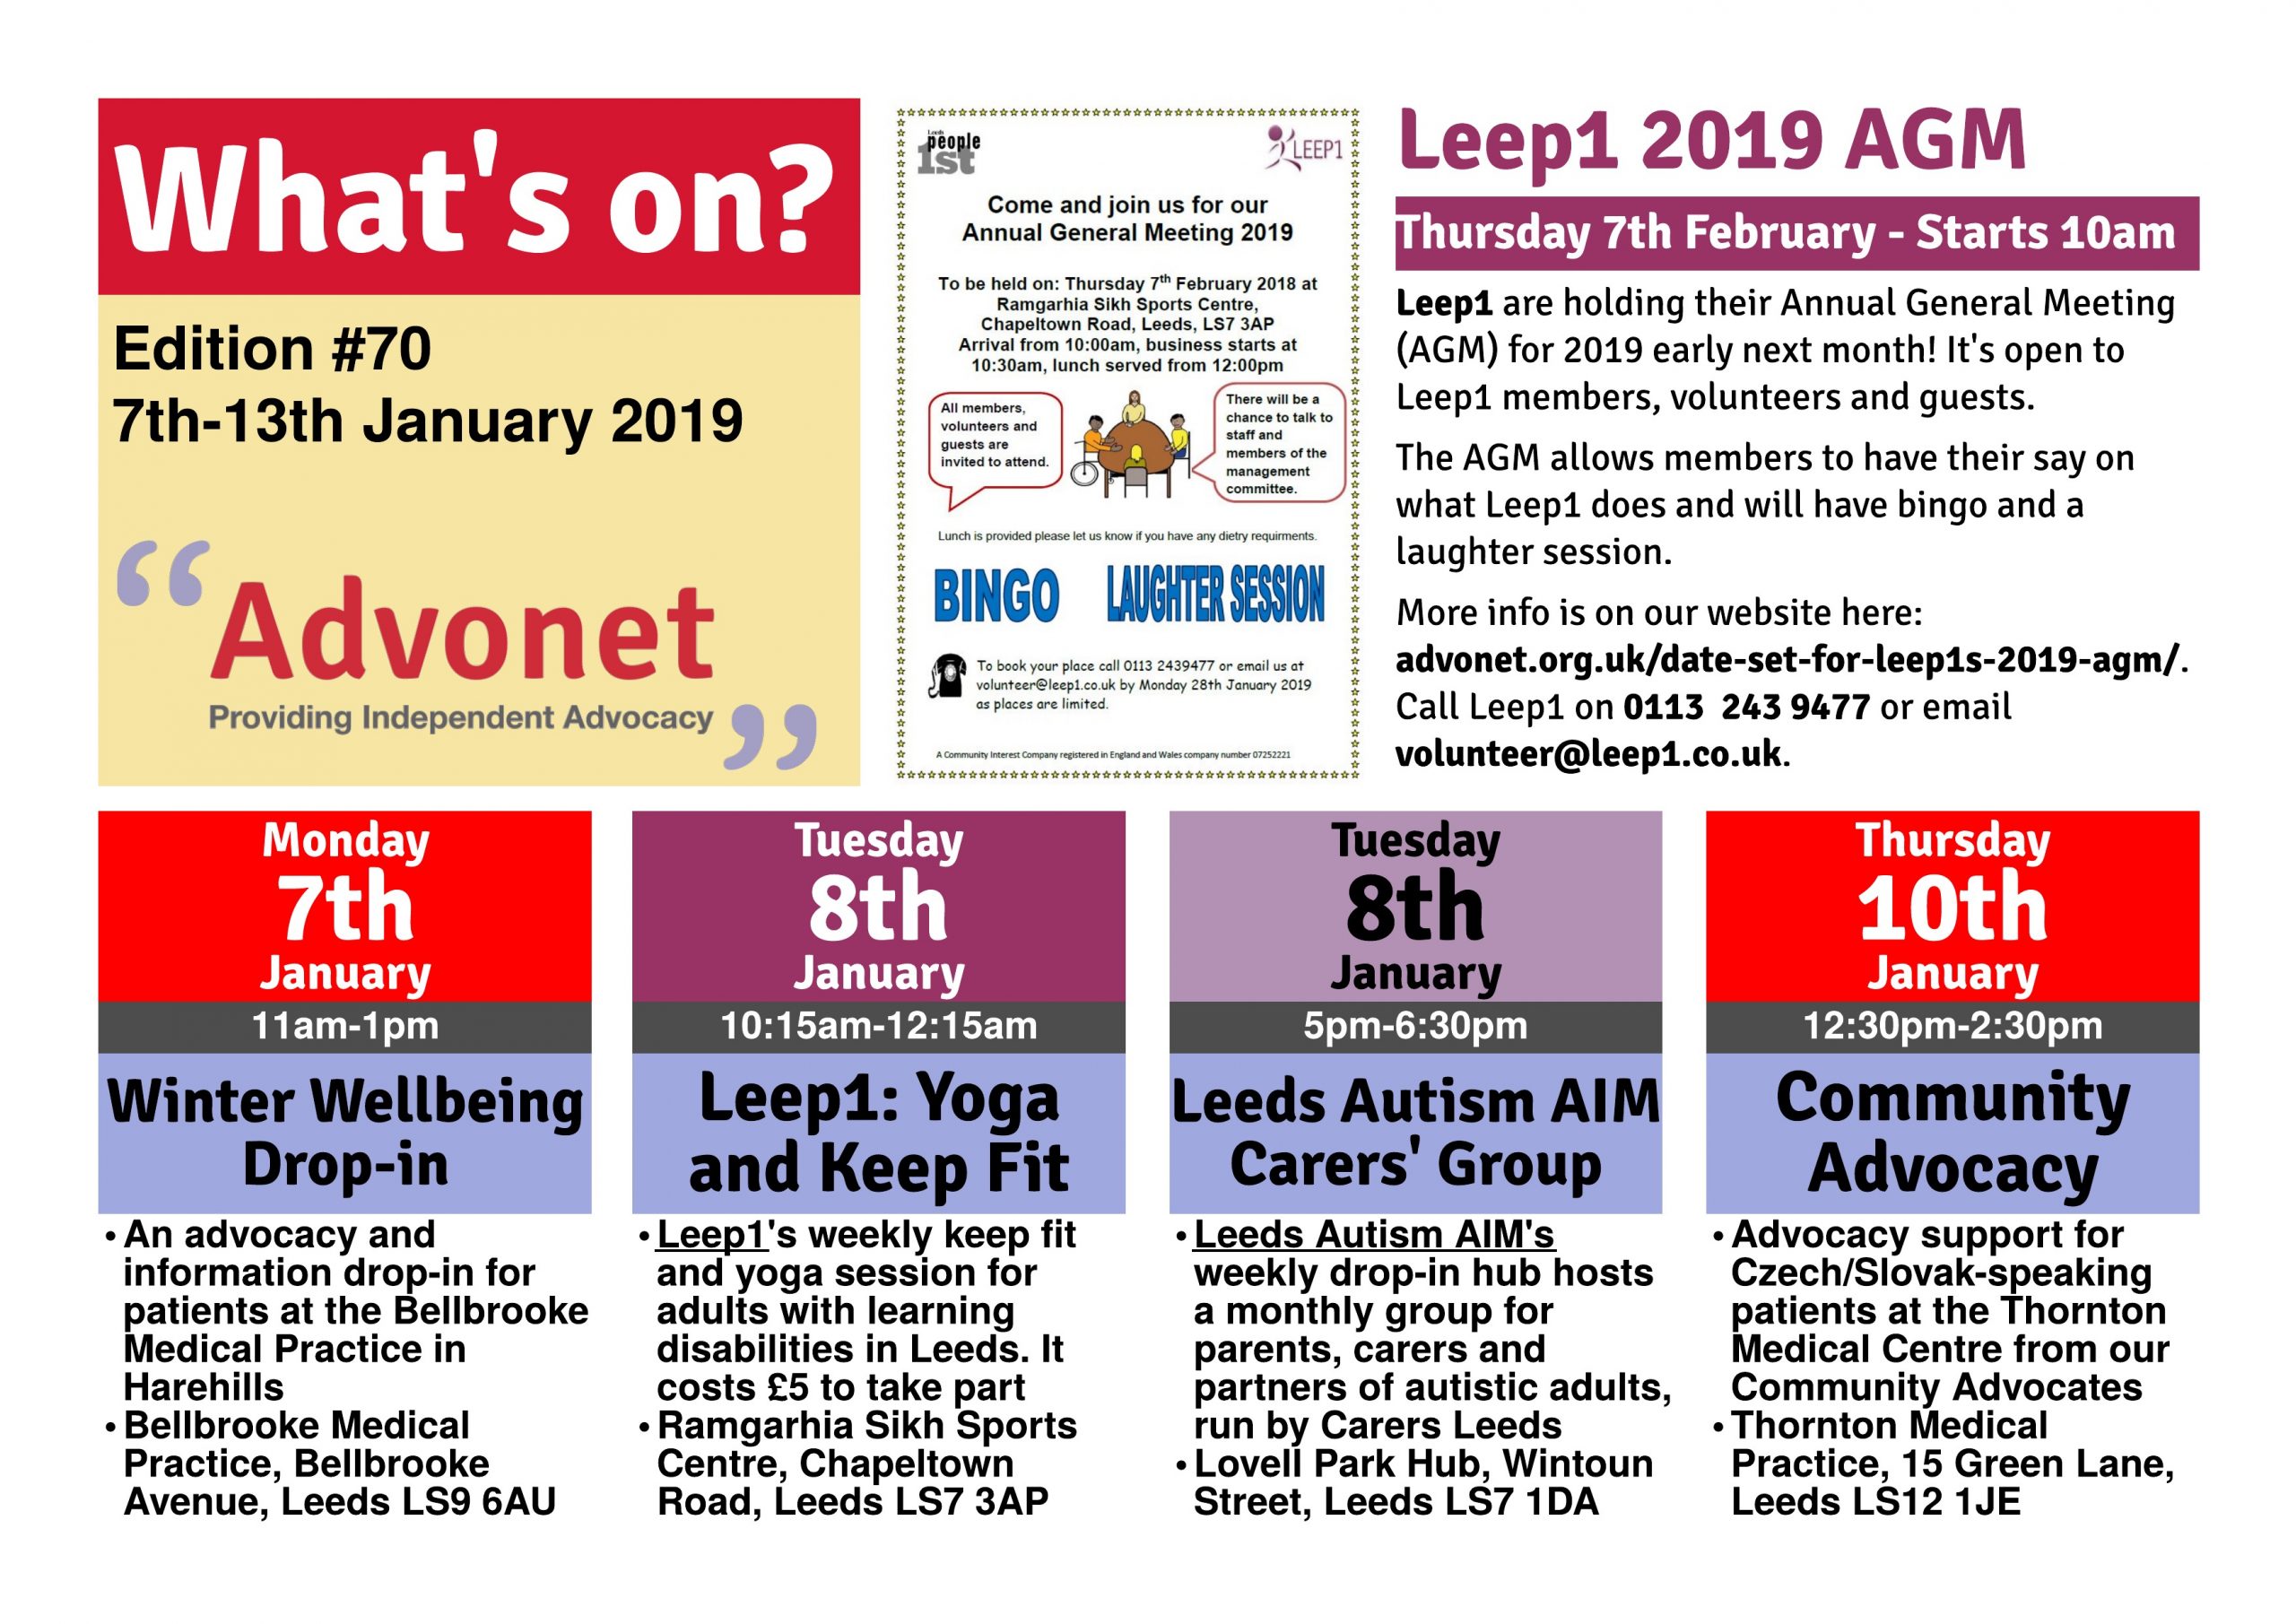 What's On - 7th-13th January 2019